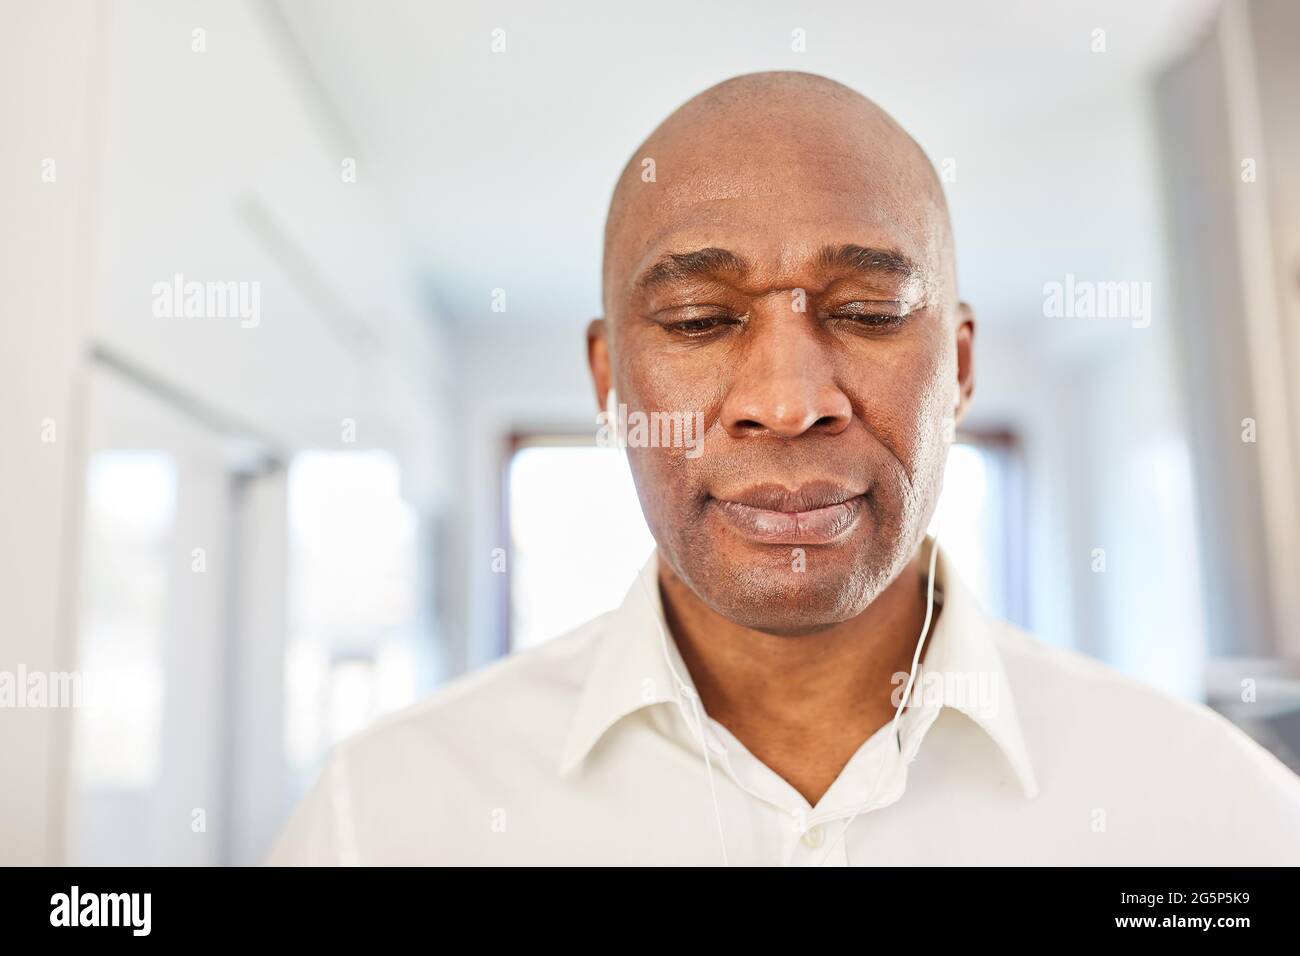 African business man with in-ear headphones in the home office during video chat Stock Photo